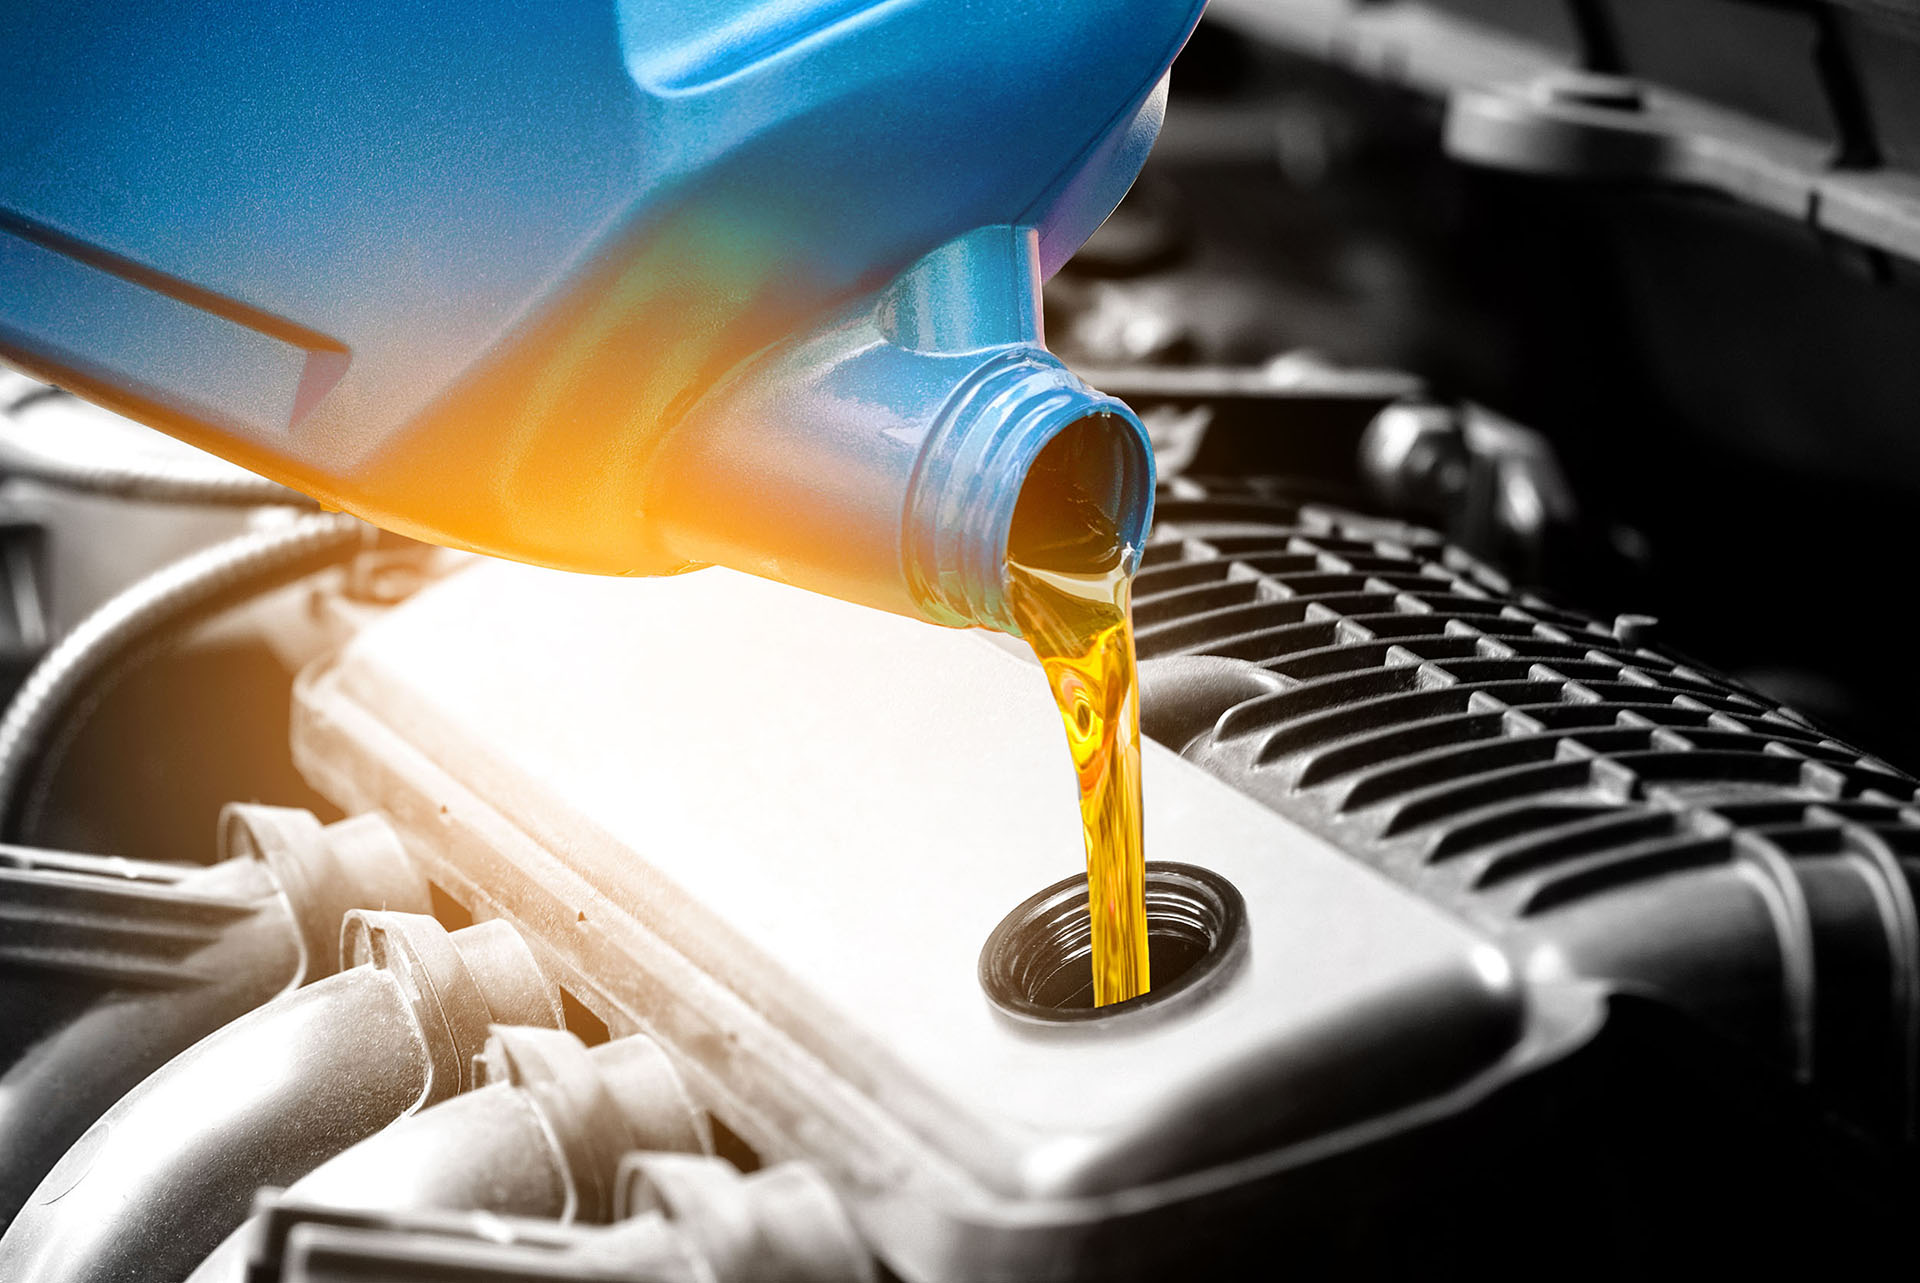 Oil being poured into engine during an oil change service